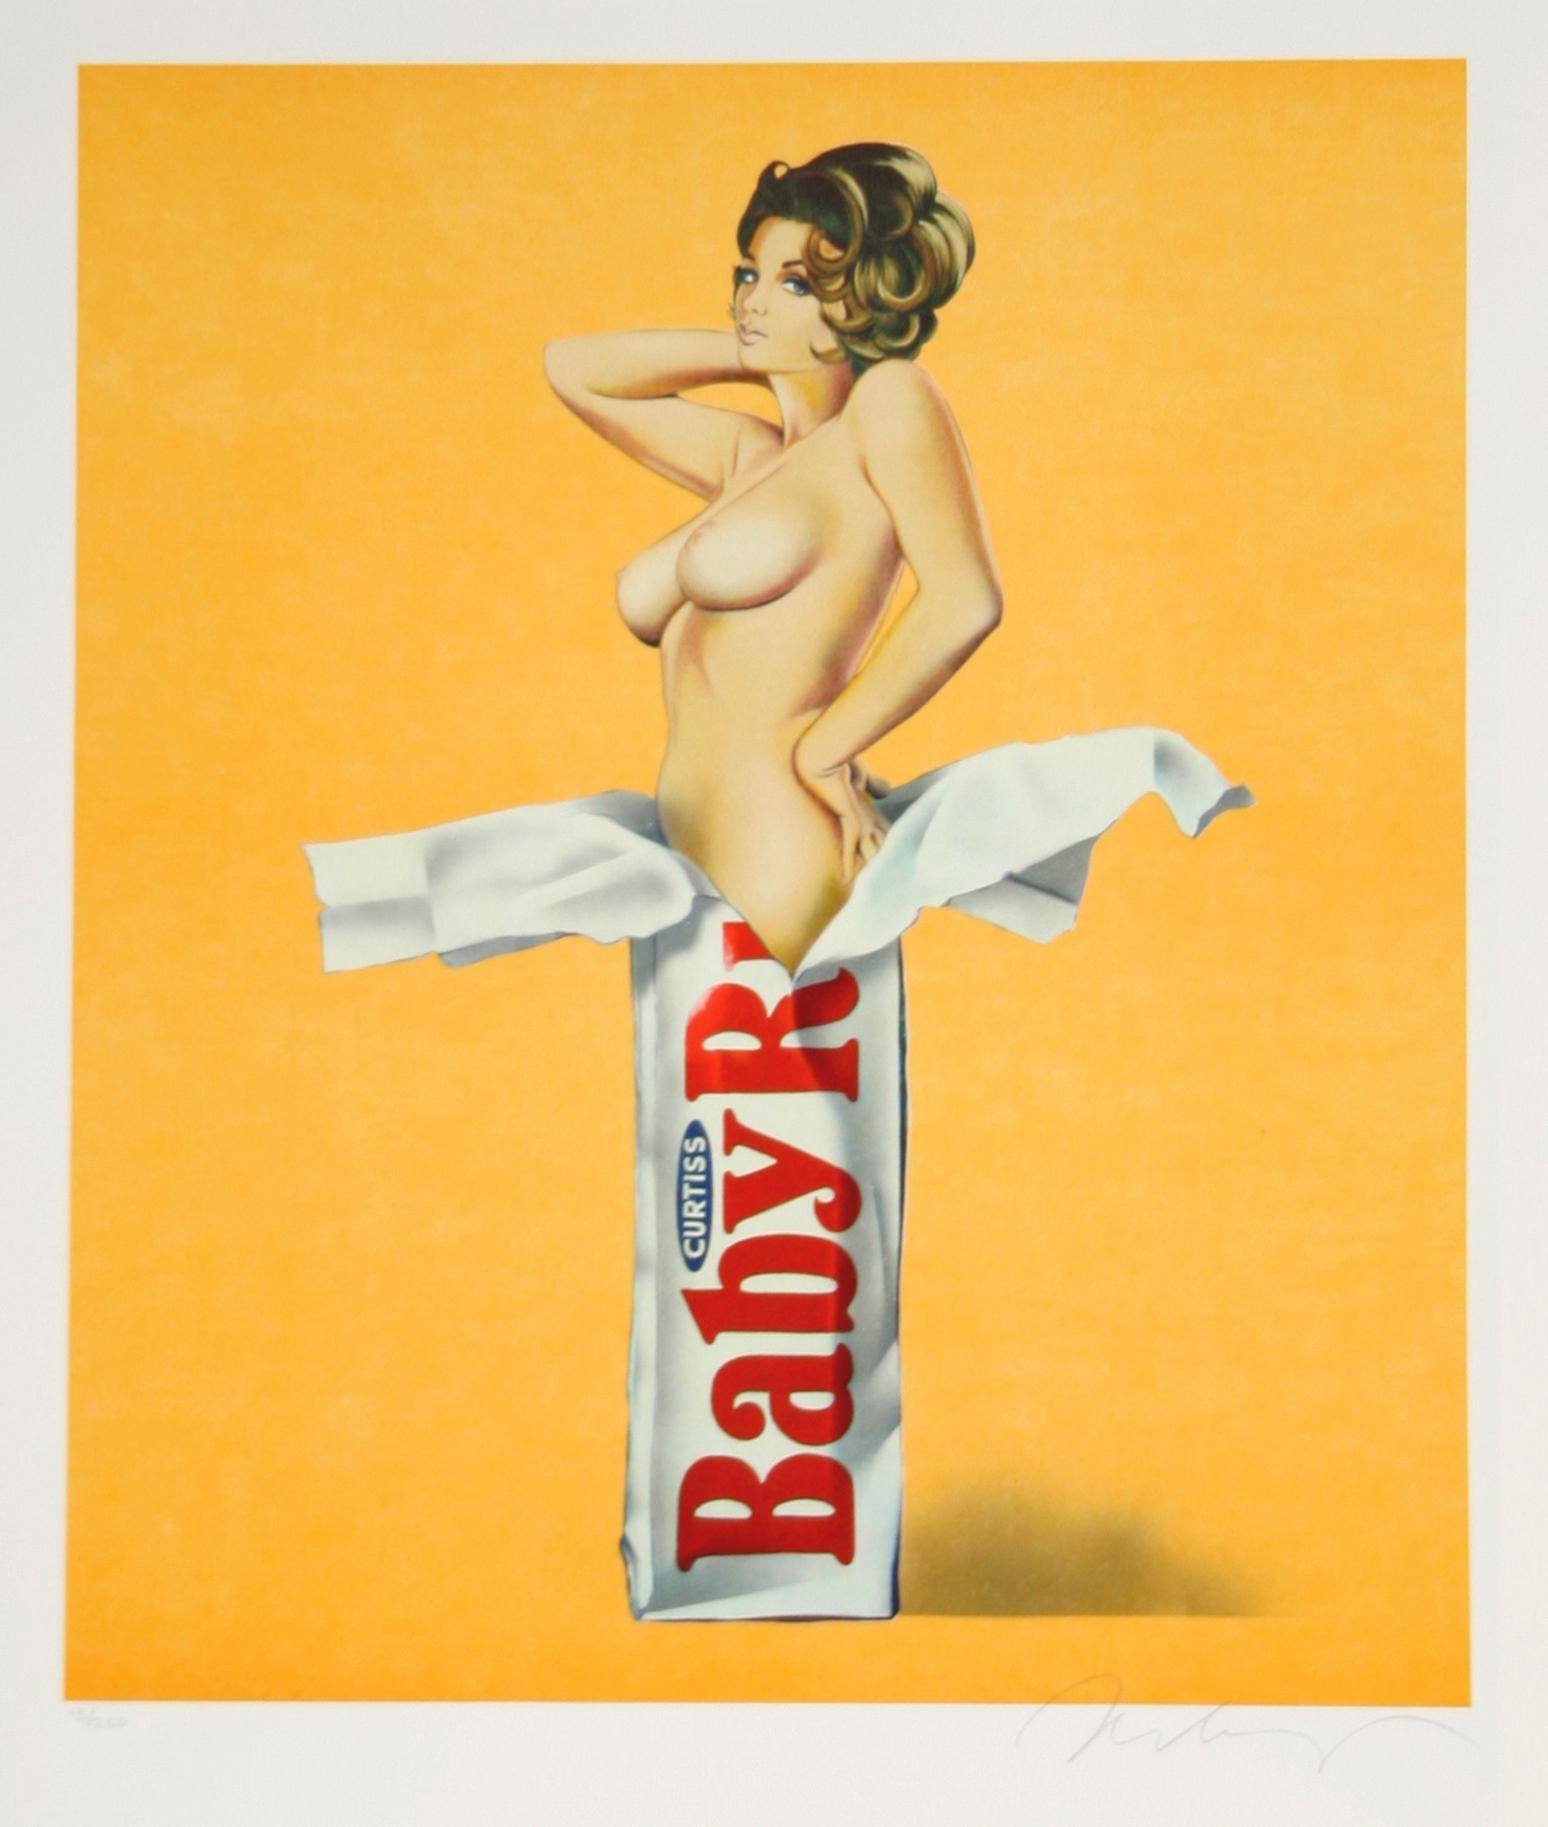 Artist: Mel Ramos, American (1935 - )
Title: Candy (Baby Ruth)
Year: 1981
Medium: Lithograph, signed and numbered in pencil 
Edition: 250
Paper Size: 24.5 in. x 20 in. (62.23 cm x 50.8 cm)
Frame: 28 x 25 inches